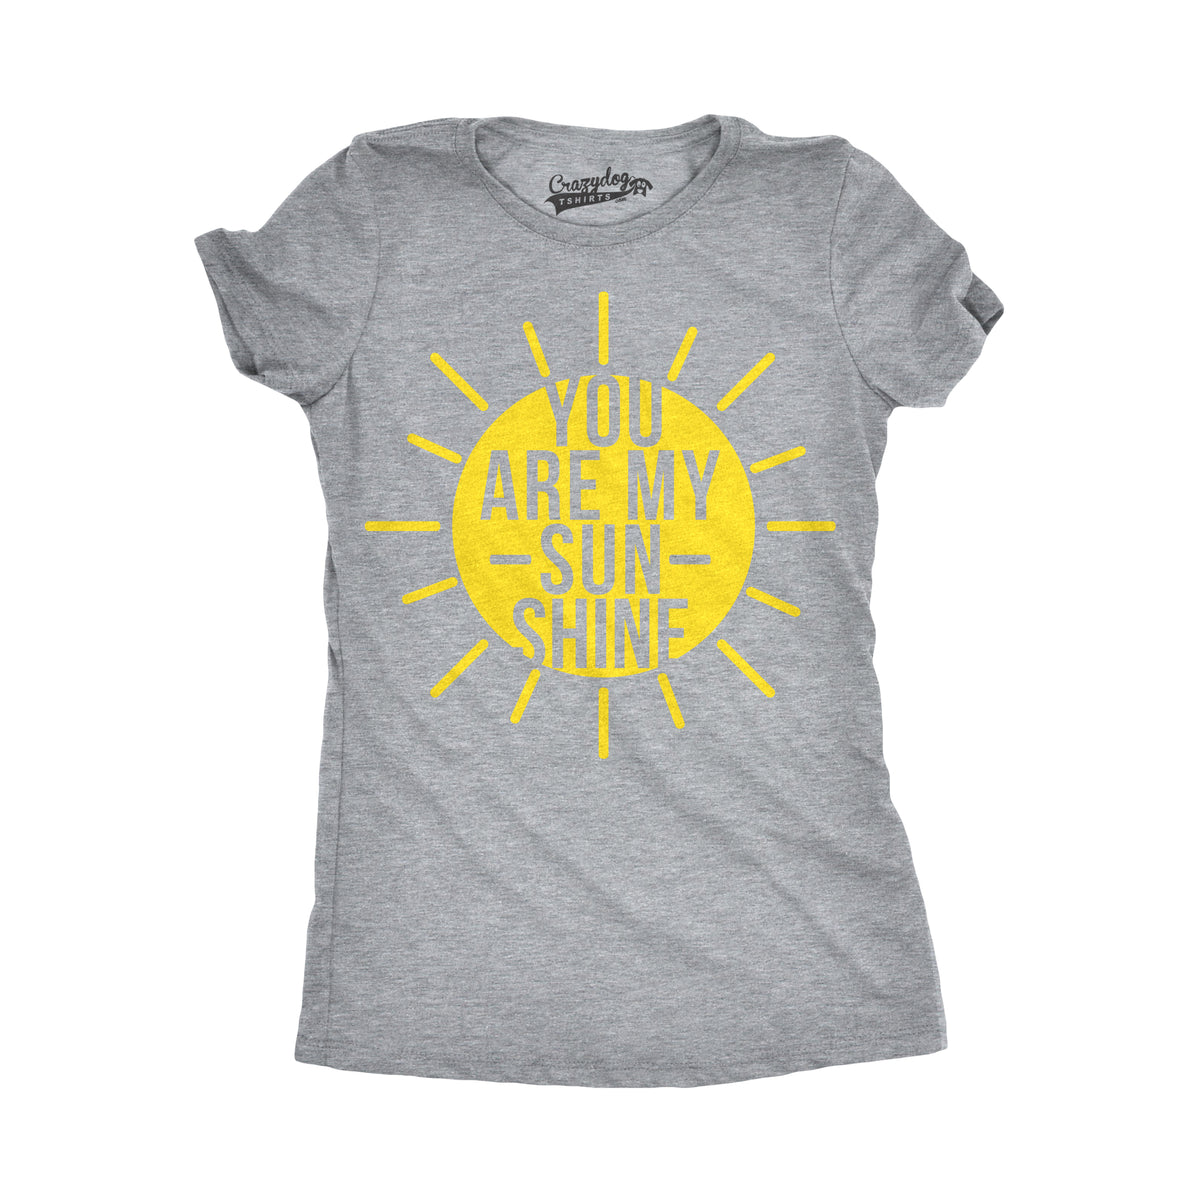 Funny Light Heather Grey You Are My Sunshine Womens T Shirt Nerdy vacation Tee